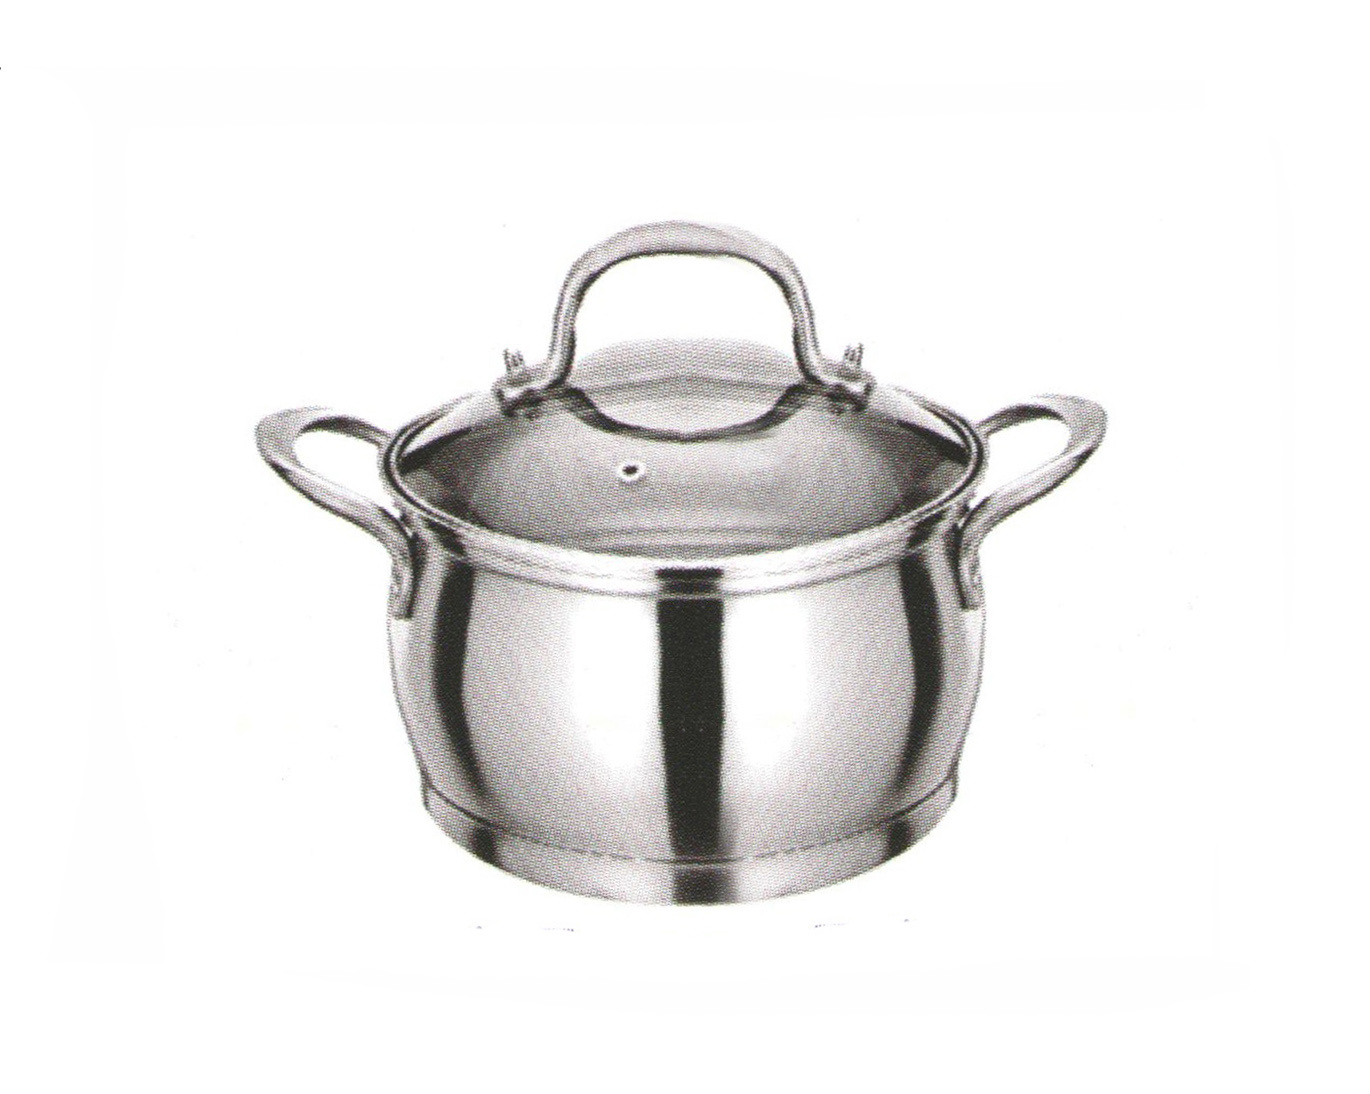 Fixed Competitive Price Cooking Tools And Accessories -
 Home Appliance Stainless Steel Cookware Set Cooking Pot with Grass Cover Cp002 – Long Prosper